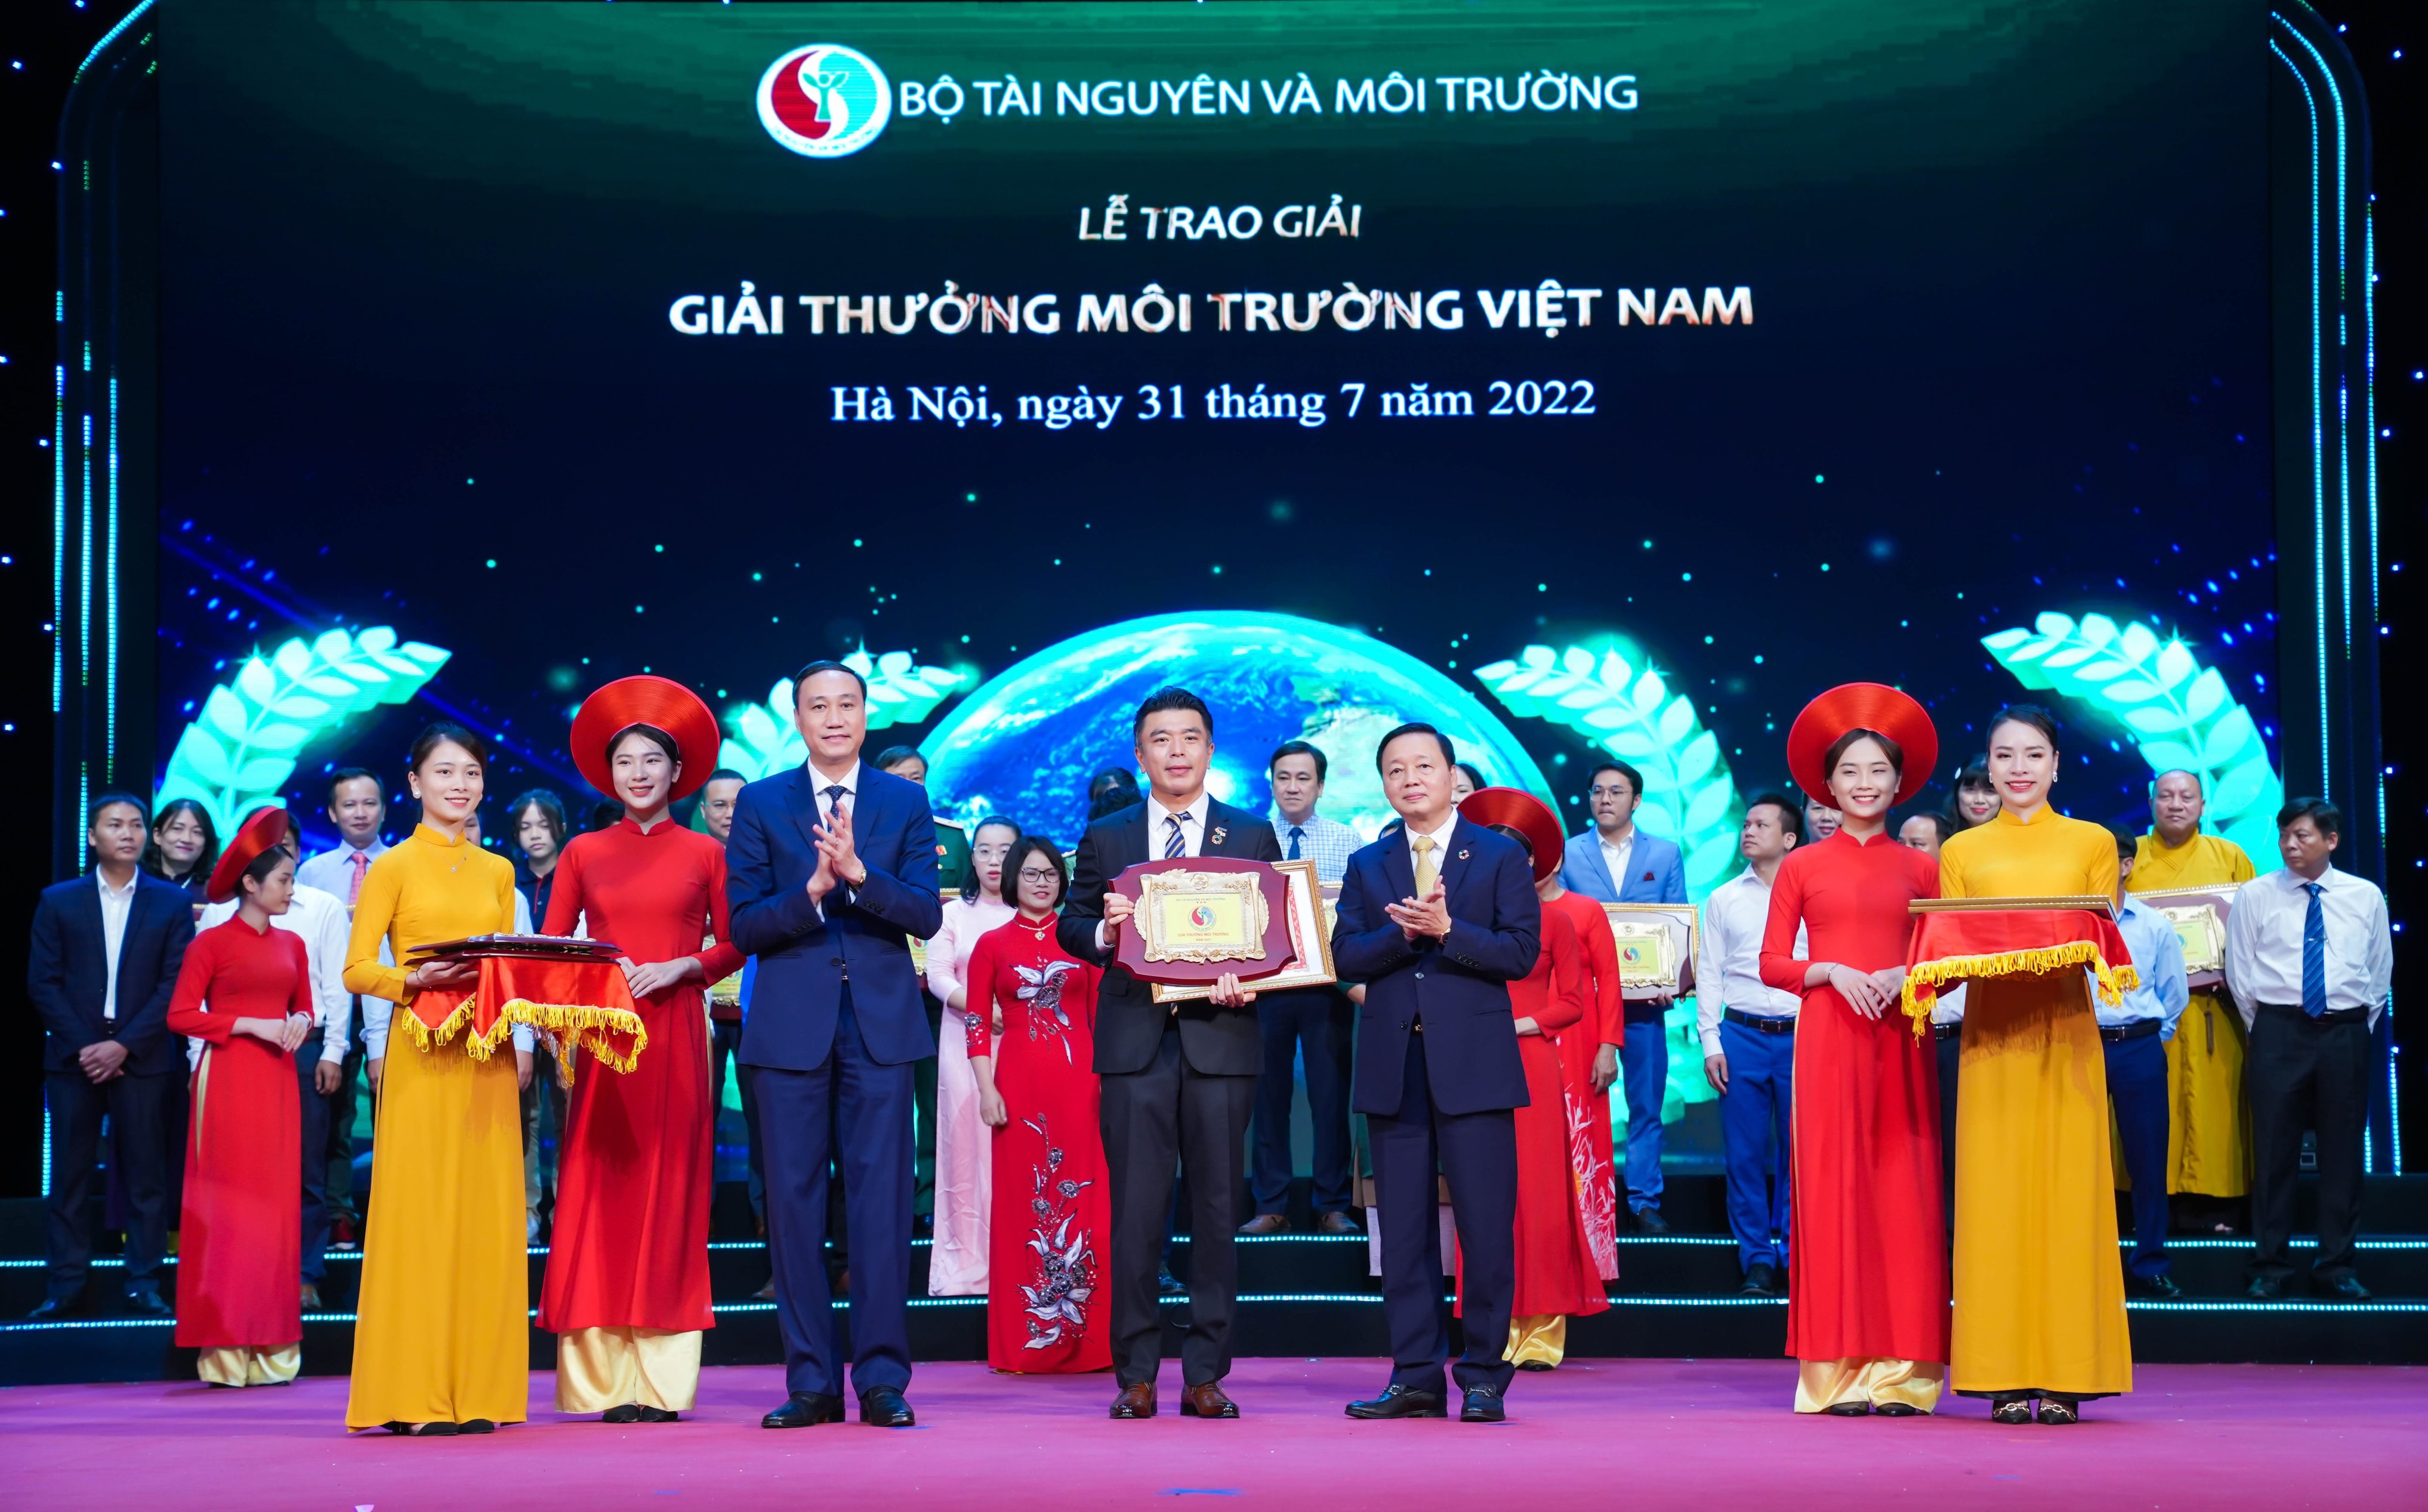 Panasonic was officially honored with Vietnam National Environment Award for the 3rd time thanks to its tremendous efforts and contributions for environment in Vietnam